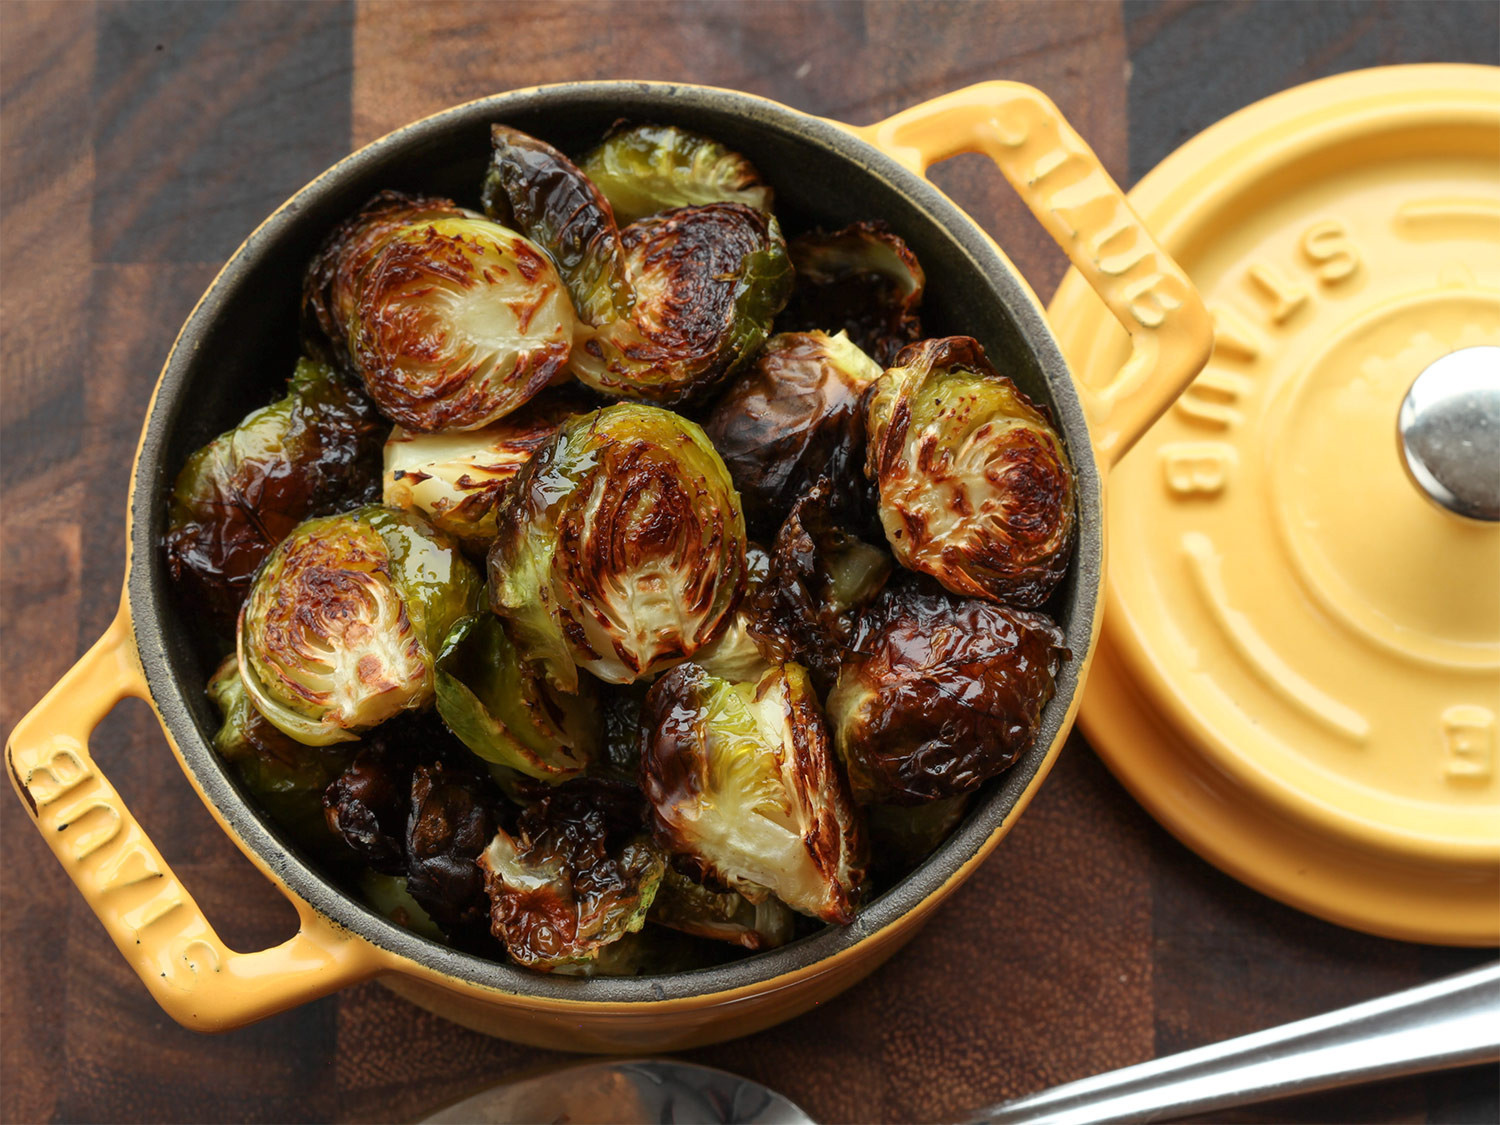 Brussels Sprouts Thanksgiving Side Dishes
 11 Recipes for Better Thanksgiving Brussels Sprouts